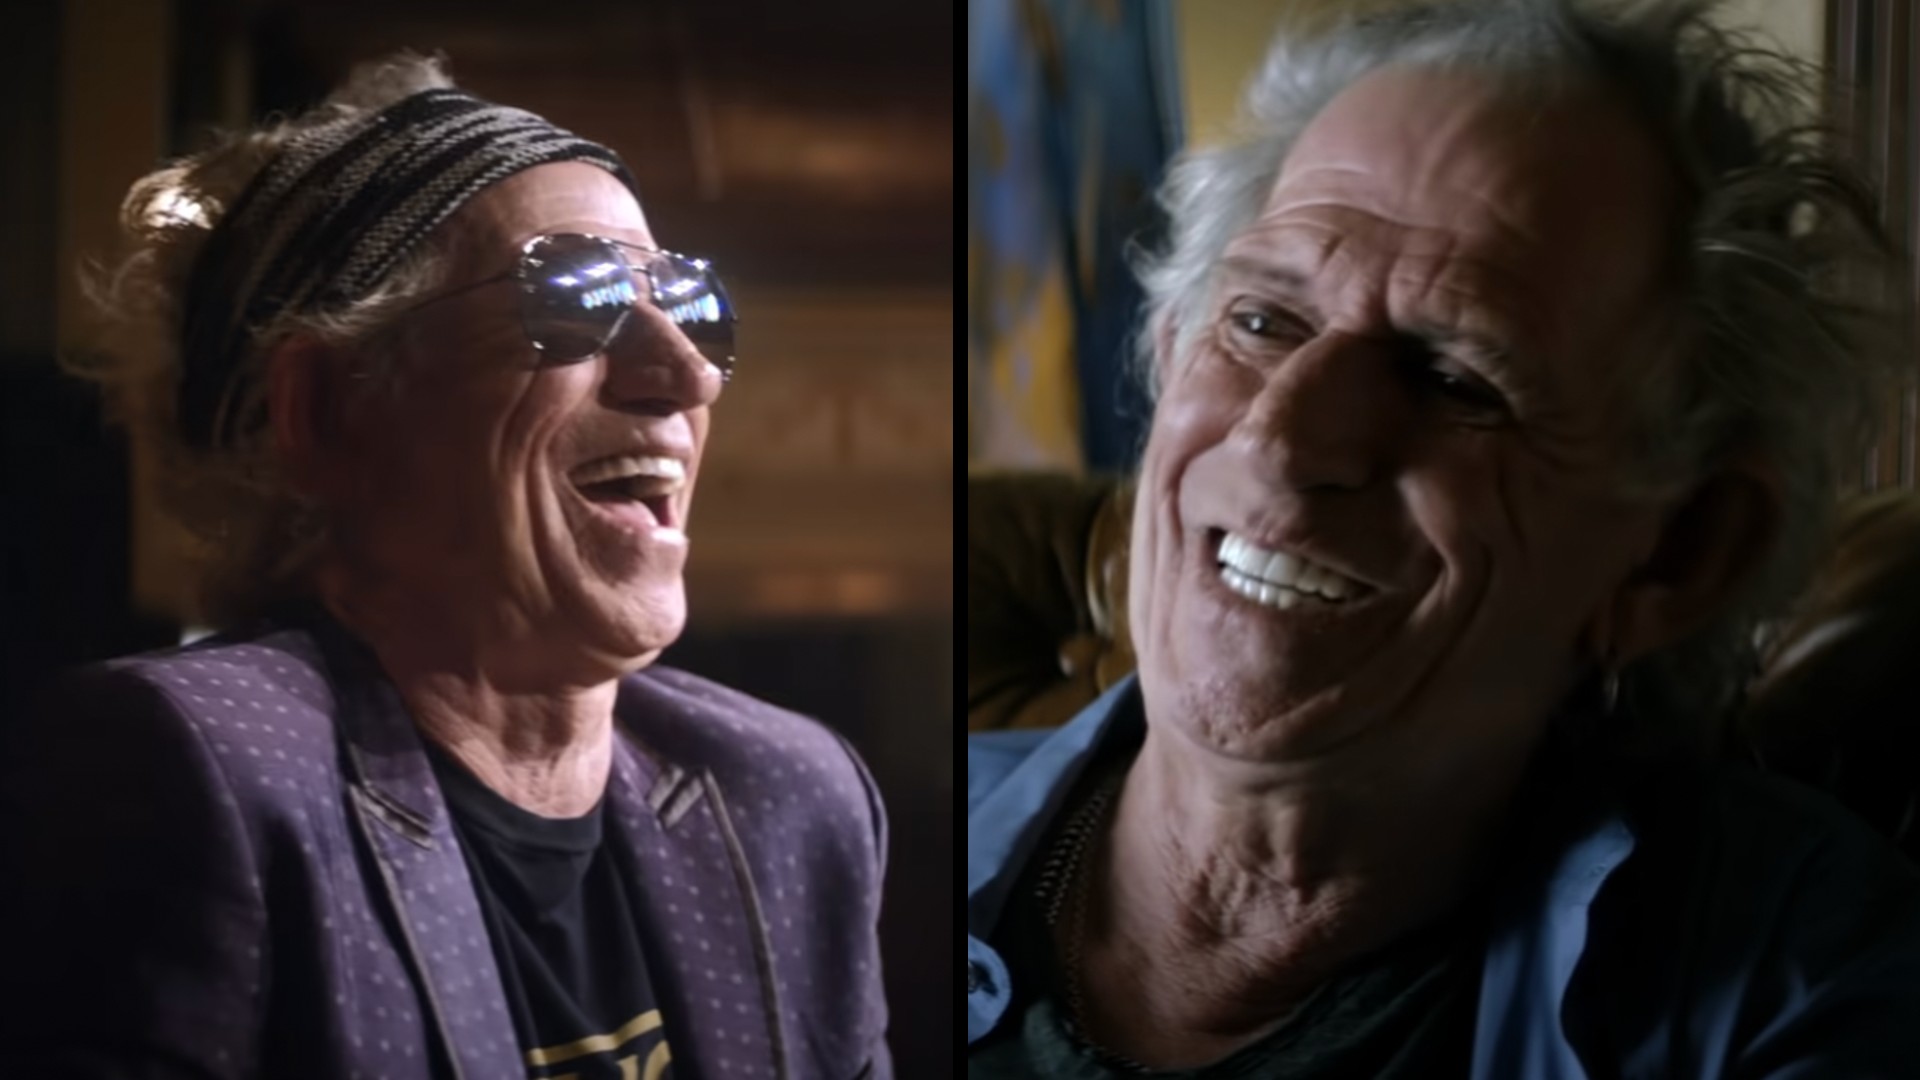 Two side-by-side photos of an older man with gray hair. In both images, he has a joyful expression and is smiling broadly. On the left, he's wearing a headband, sunglasses, and a jacket. On the right, he's wearing a more casual shirt and no accessories.